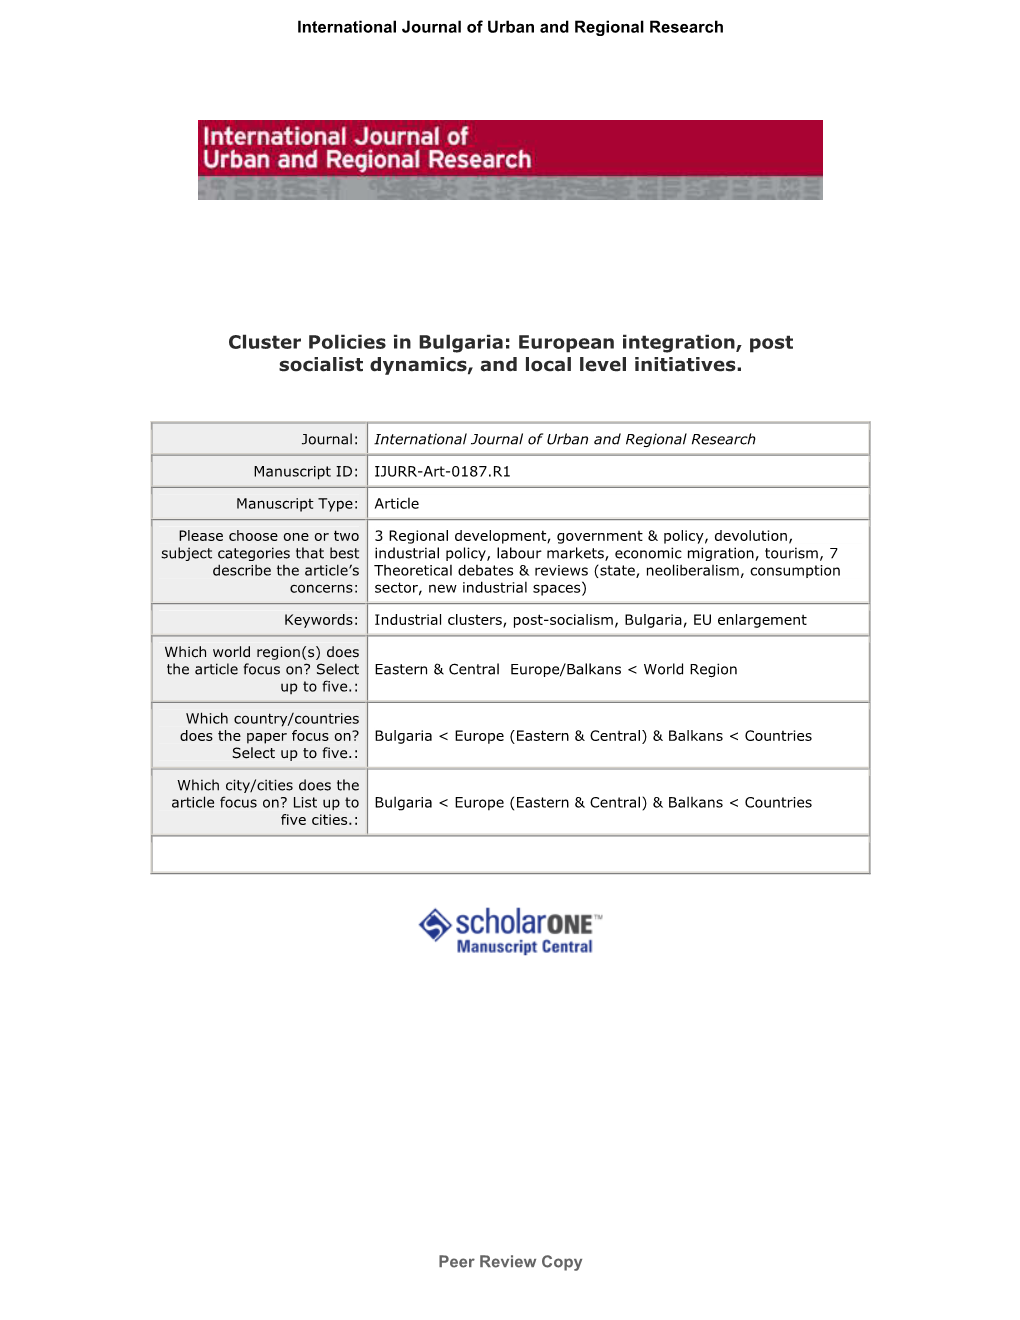 Cluster Policies in Bulgaria: European Integration, Post Socialist Dynamics, and Local Level Initiatives